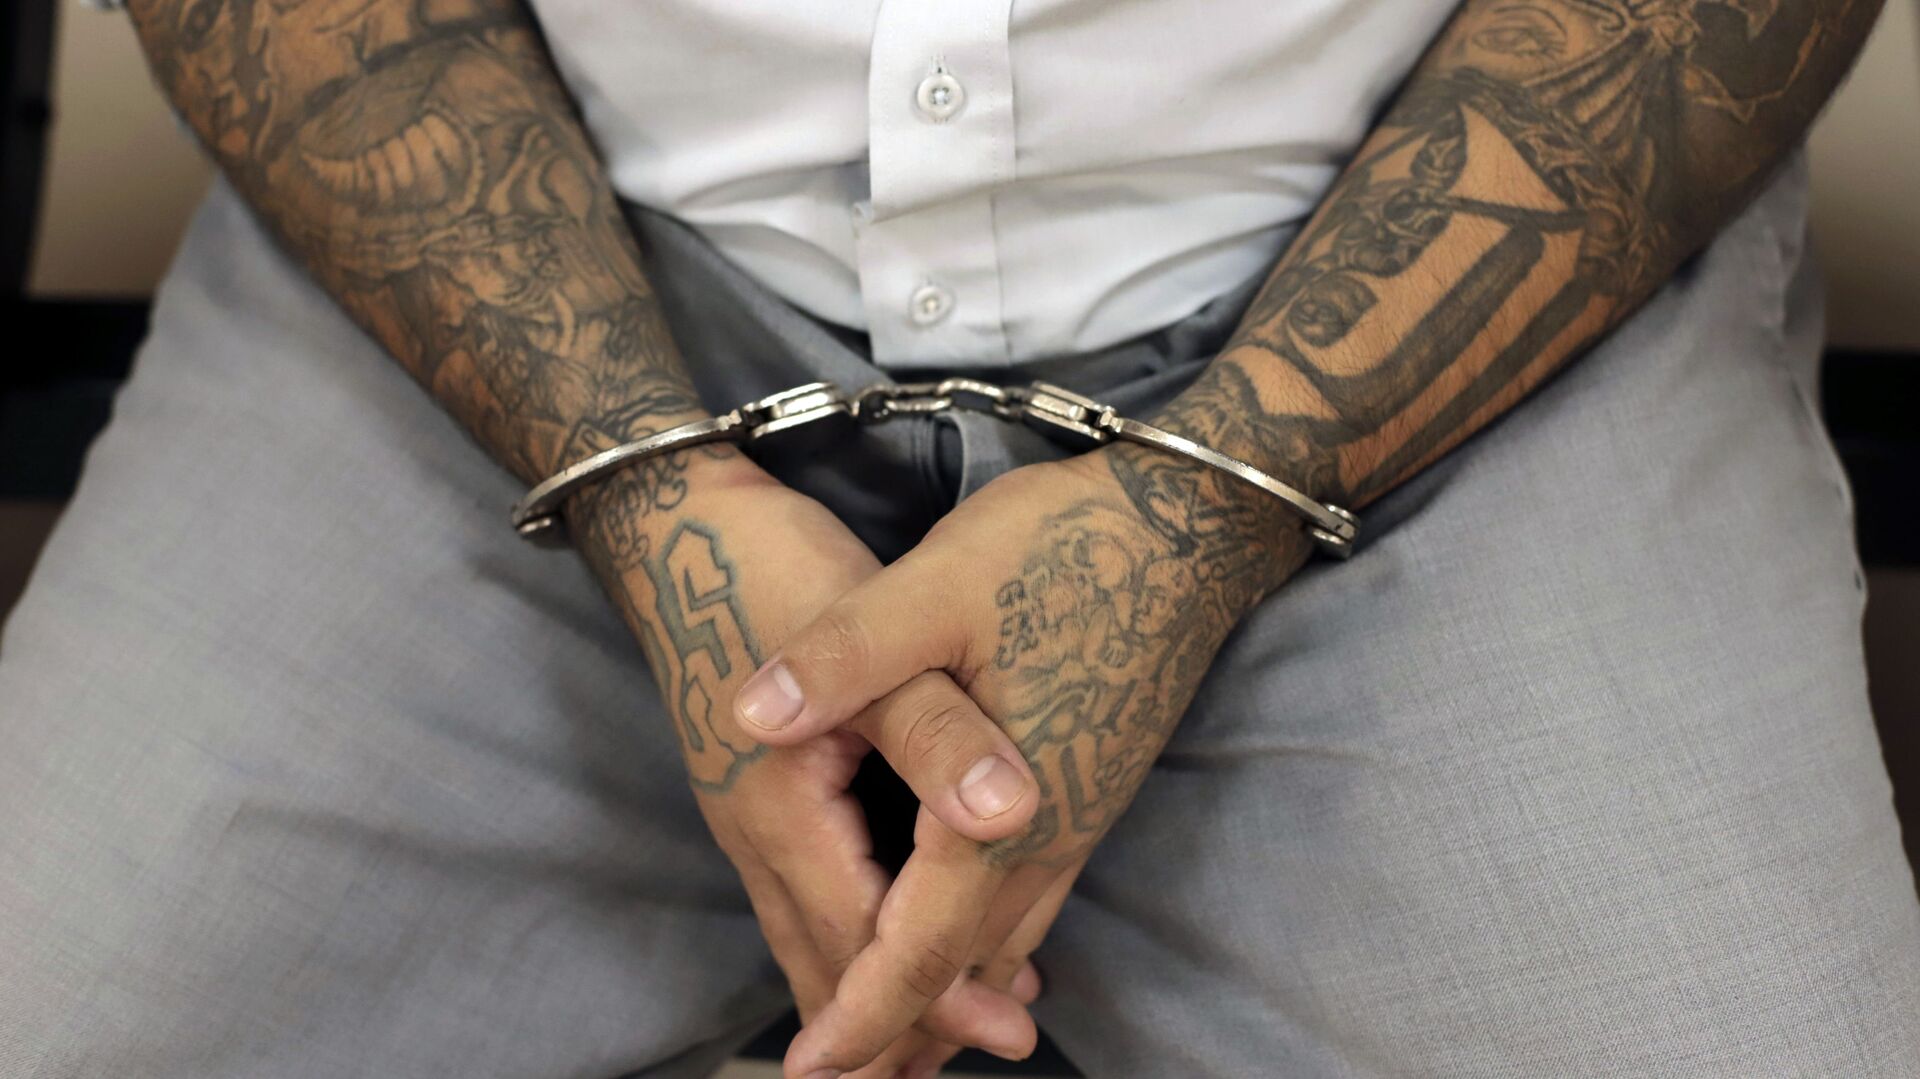 A handcuffed Mara Salvatrucha gang member waits for the start of a court trial at the Isidro Menendez Judicial Center in San Salvador, El Salvador, Thursday, Oct. 10, 2019. El Salvador on Tuesday began a mass trial of over 400 alleged gang members, including purported leaders of the feared transnational crime group Mara Salvatrucha, or MS-13.  - Sputnik International, 1920, 12.04.2022